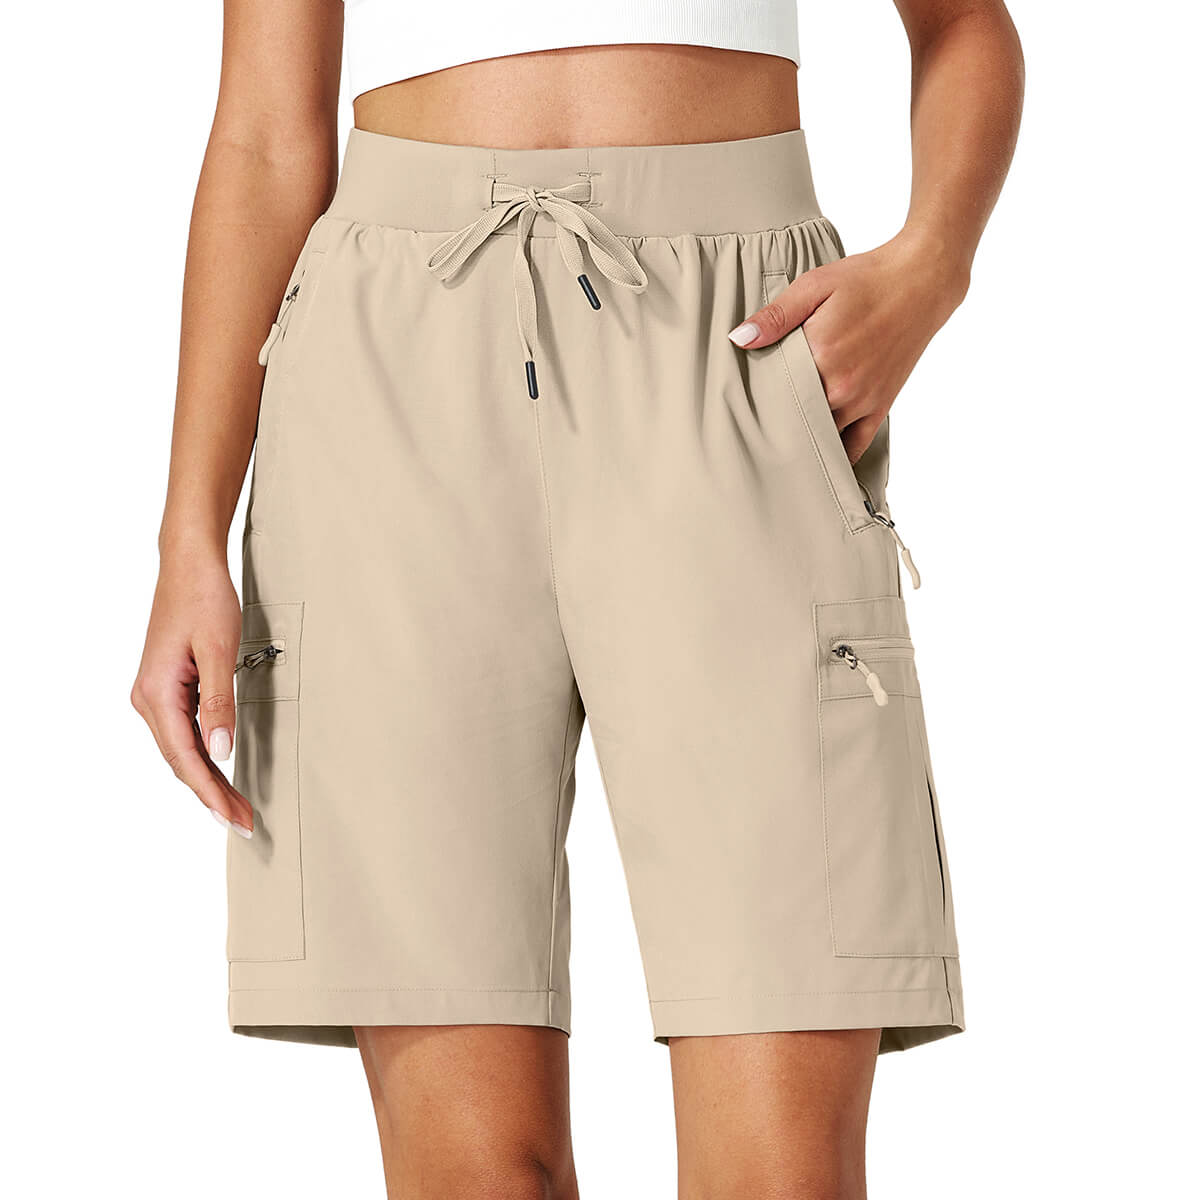 Cromoncent Women's Hiking Cargo Shorts Quick Dry Athletic Casual